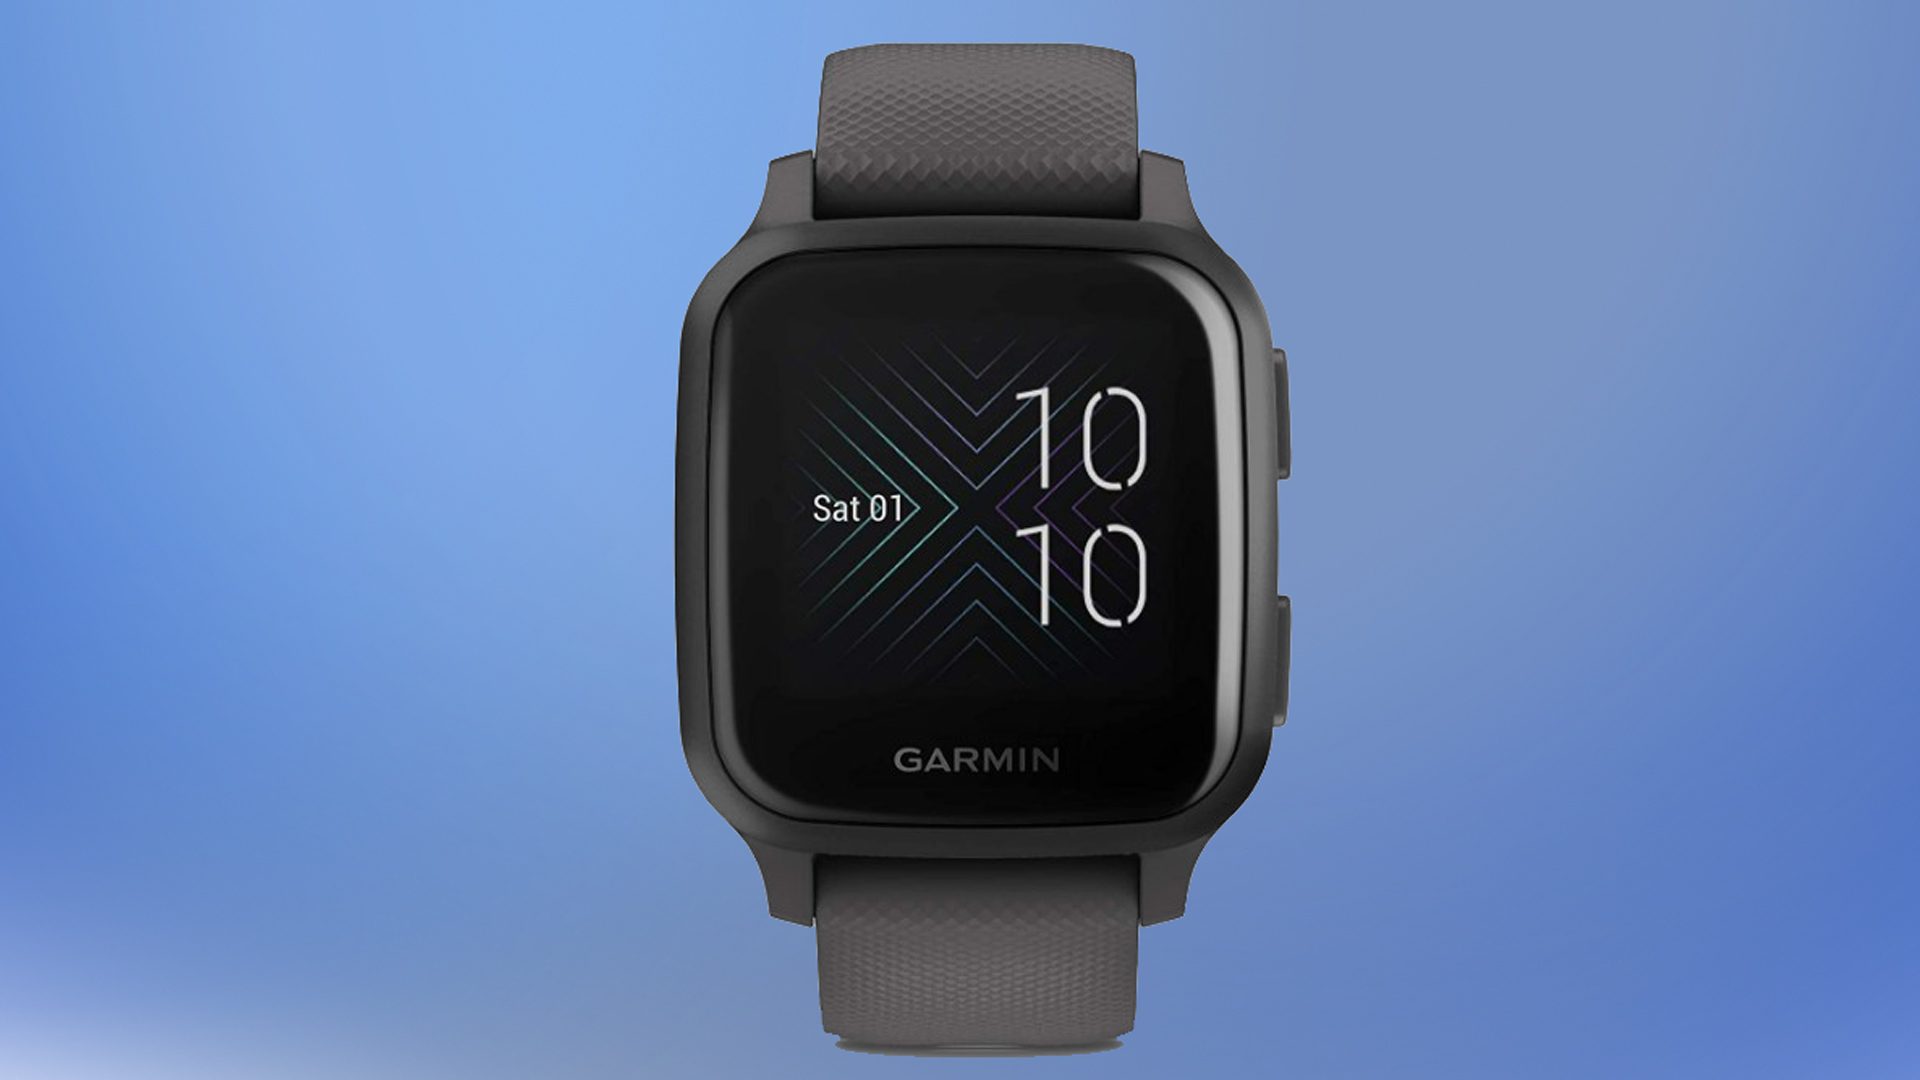 Garmin to launch Venu Sq 2 smartwatch with improved battery life | NextPit